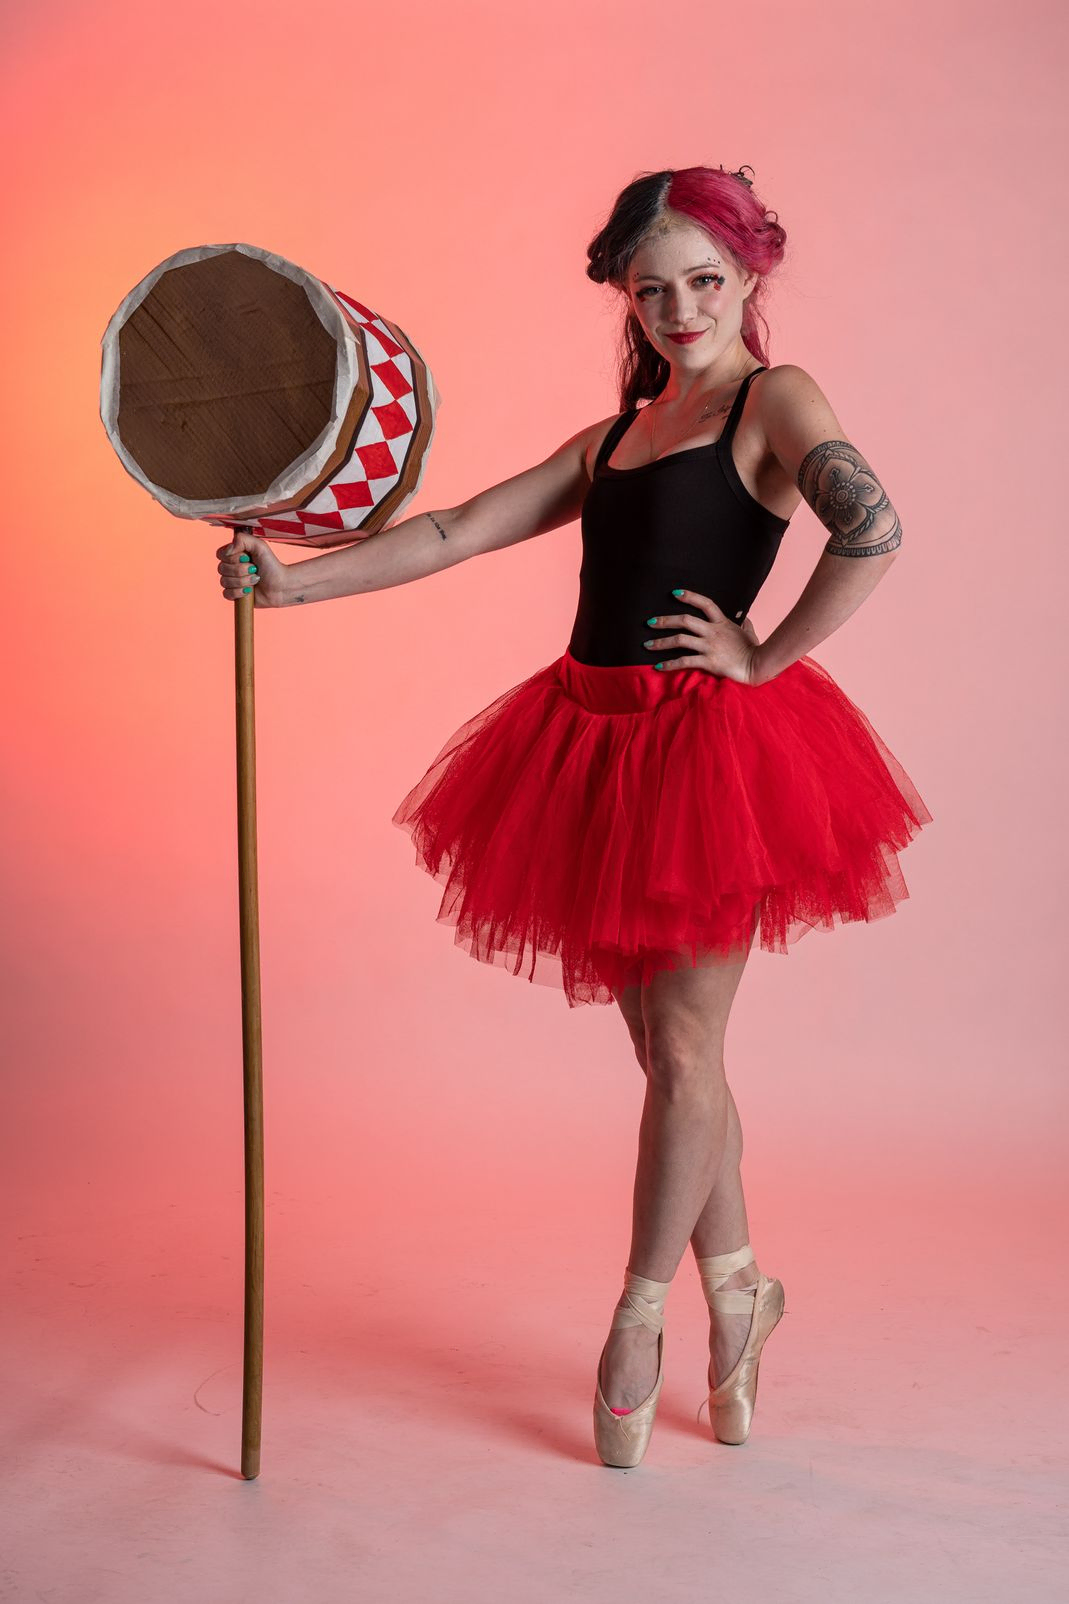 Women wearing a red tutu holding a large hammer